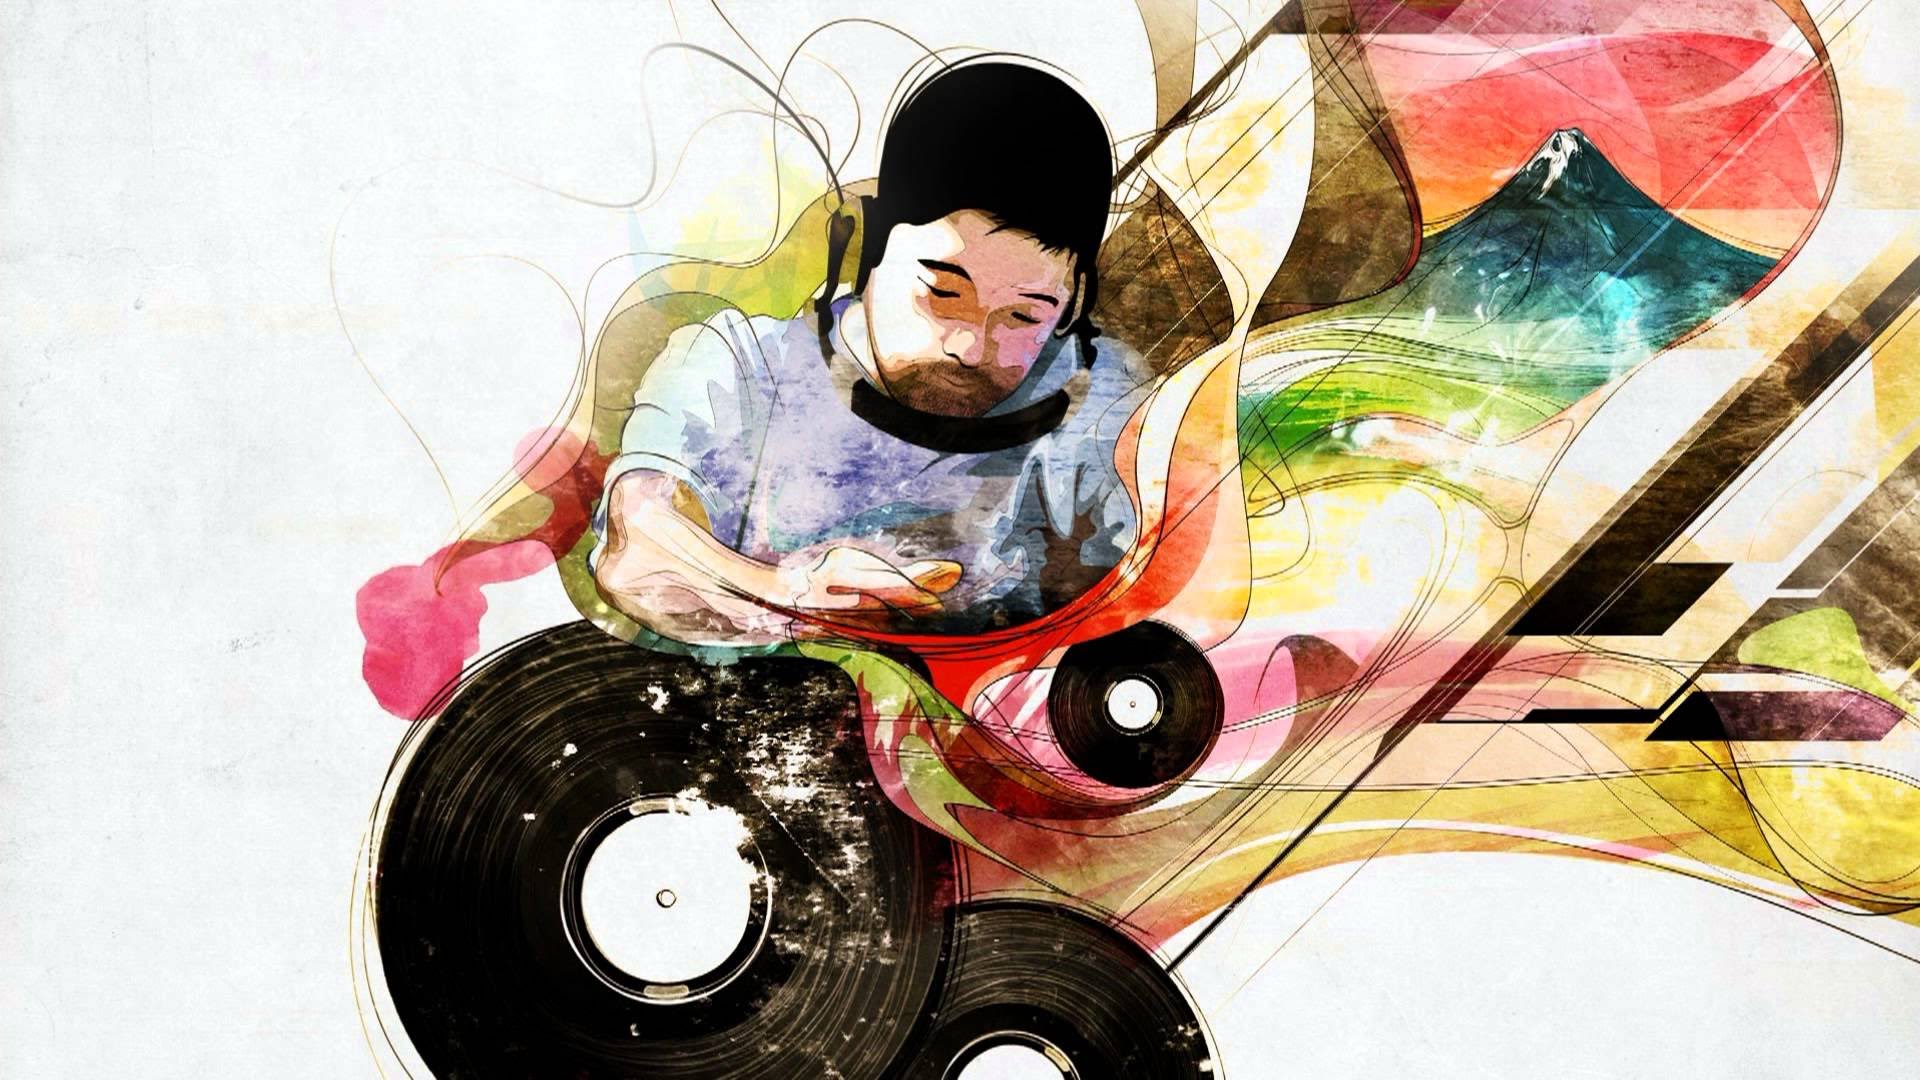 Nujabes #18